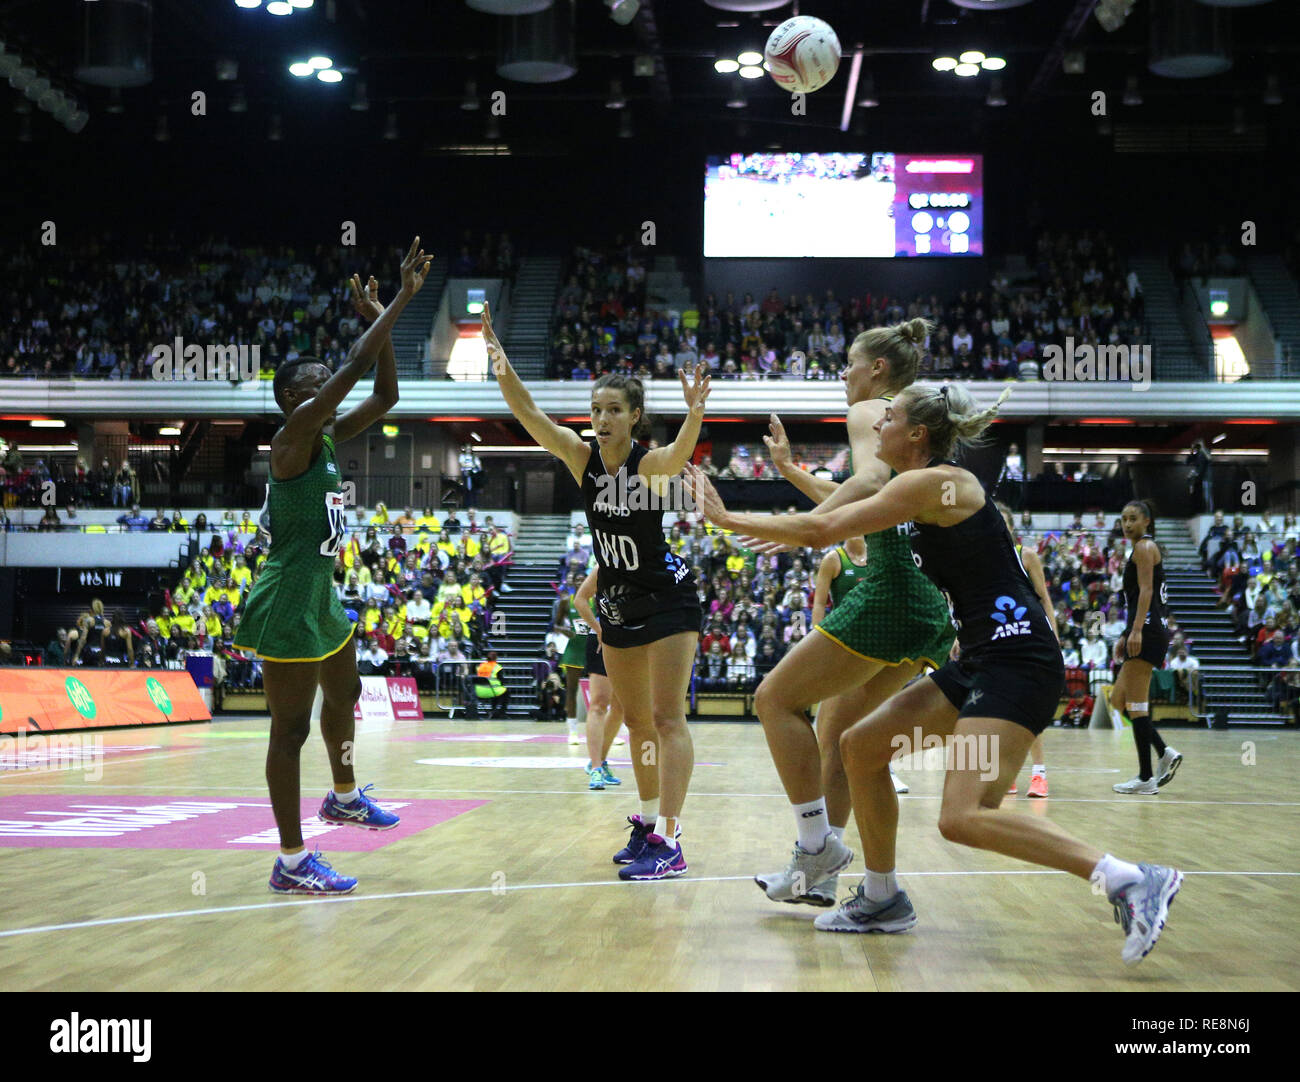 A general view of South Africa SPAR Proteas playing the New Zealand Silver Ferns during the Vitality netball International Series match at The Copper Box, London. Stock Photo